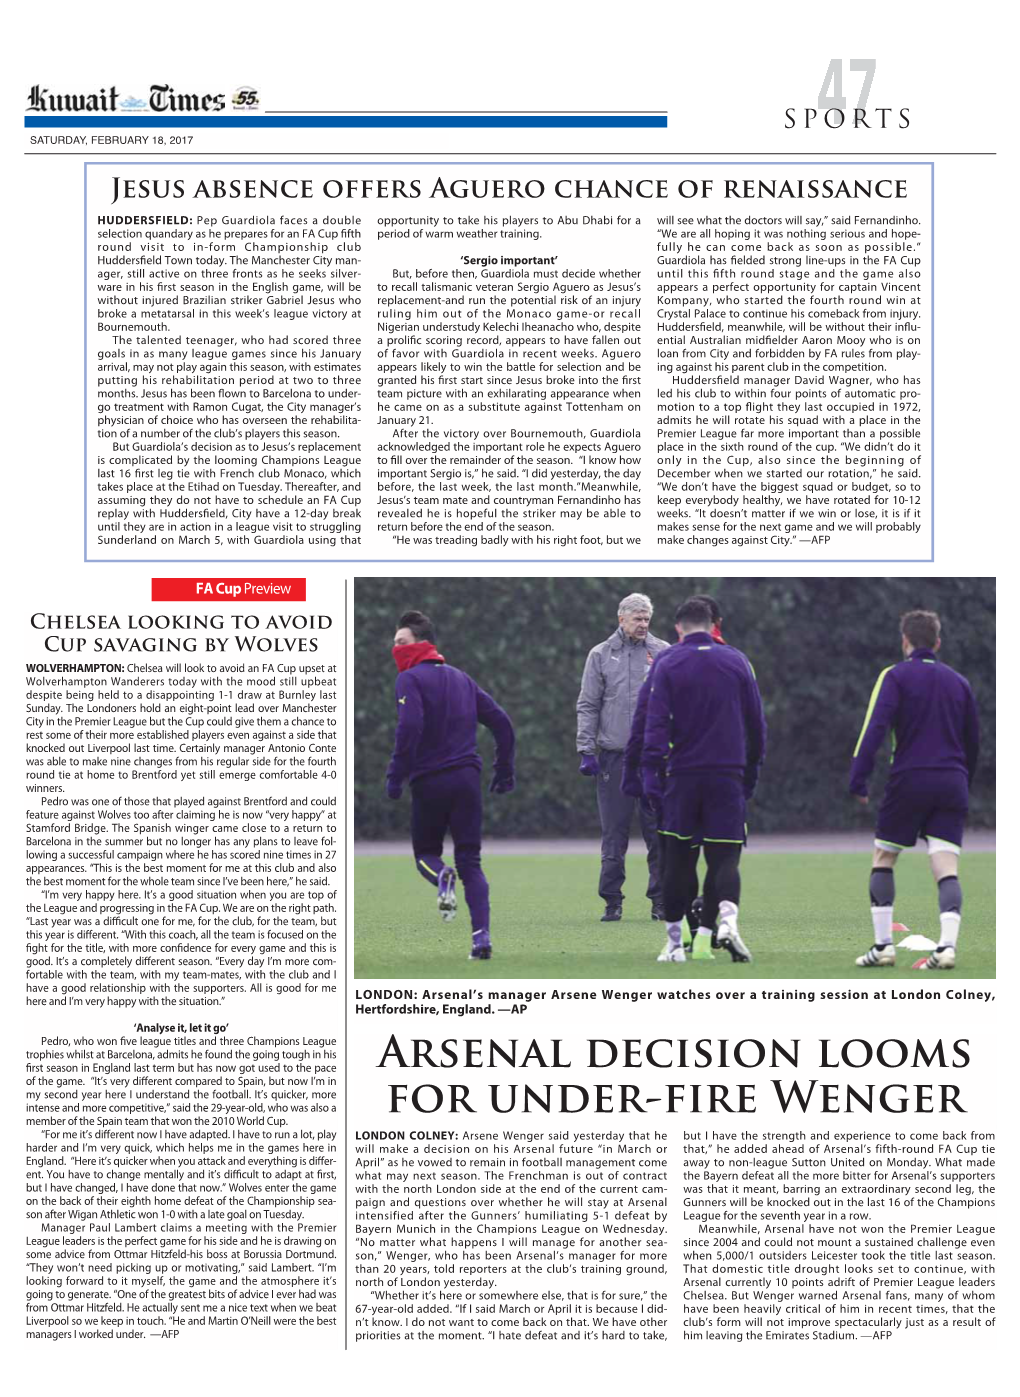 Arsenal Decision Looms for Under-FIRE WENGER